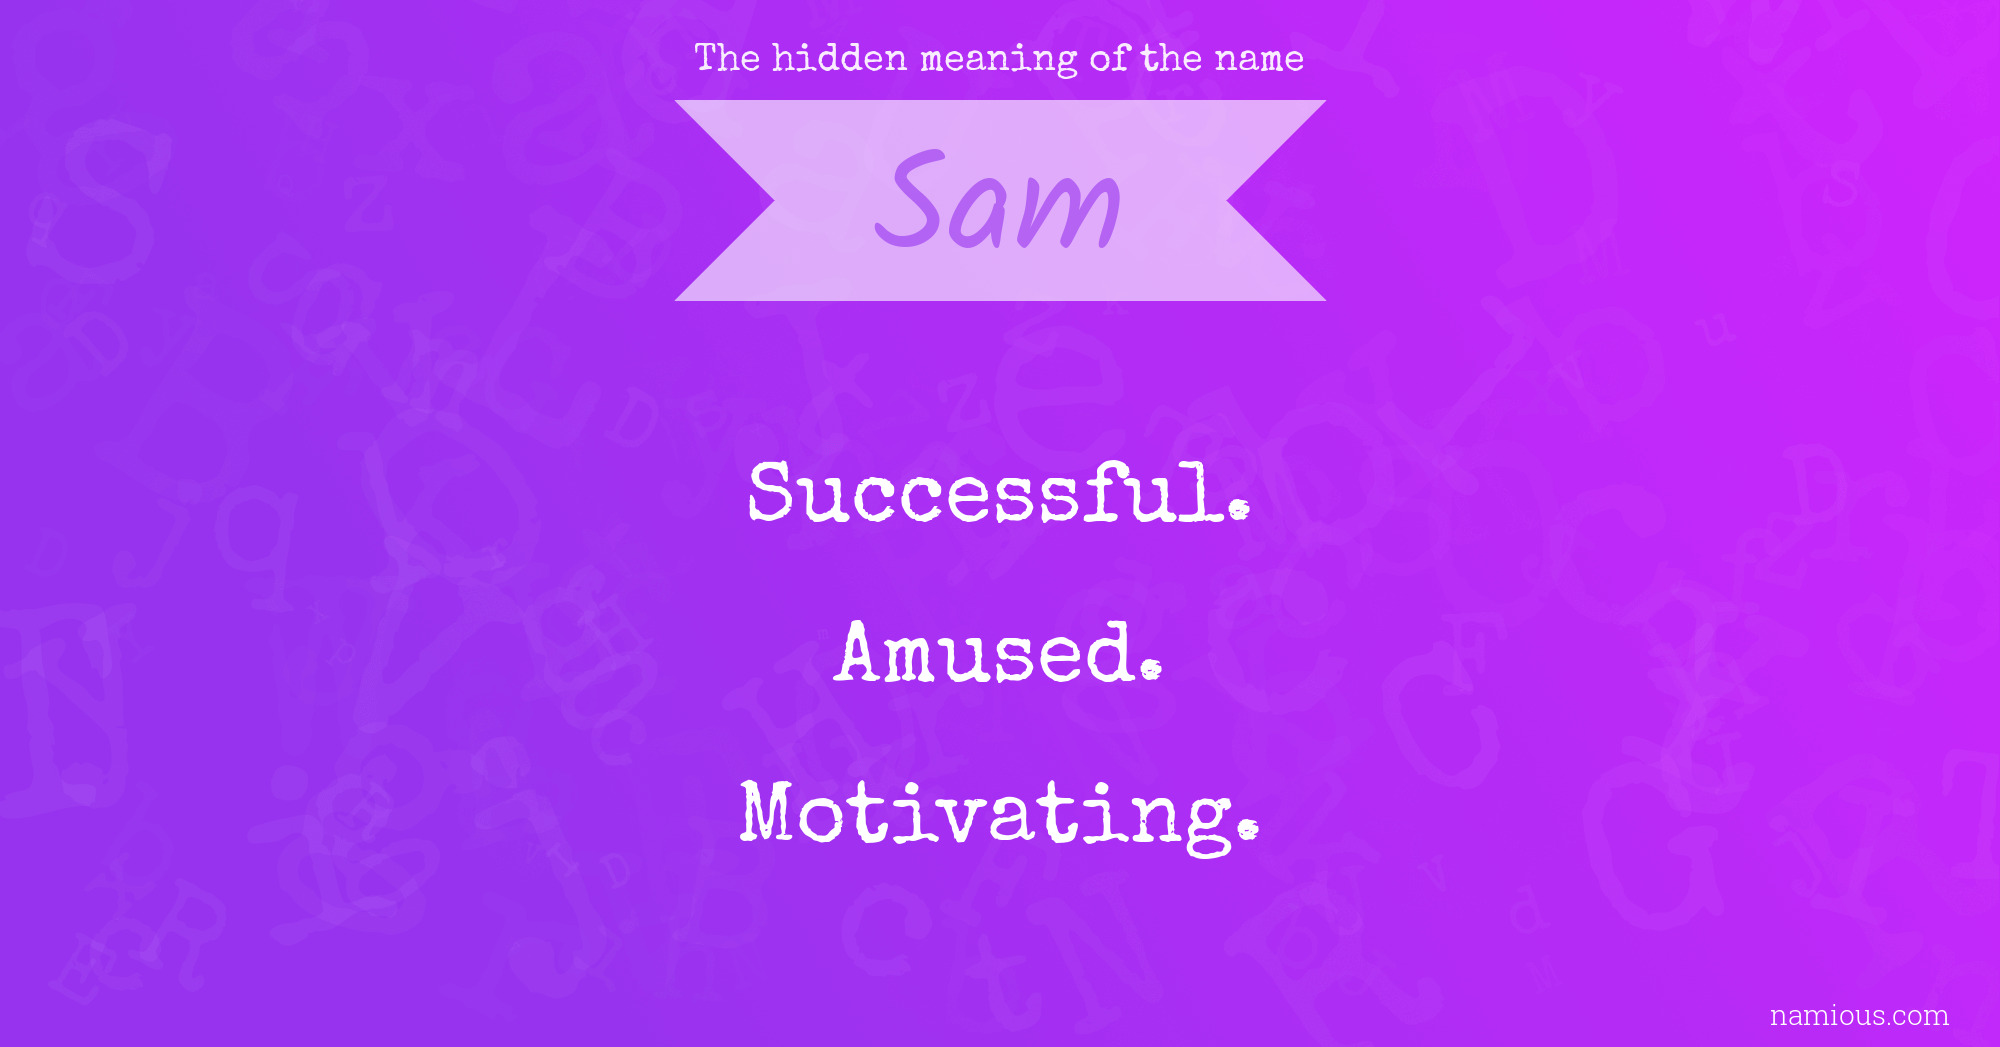 The hidden meaning of the name Sam